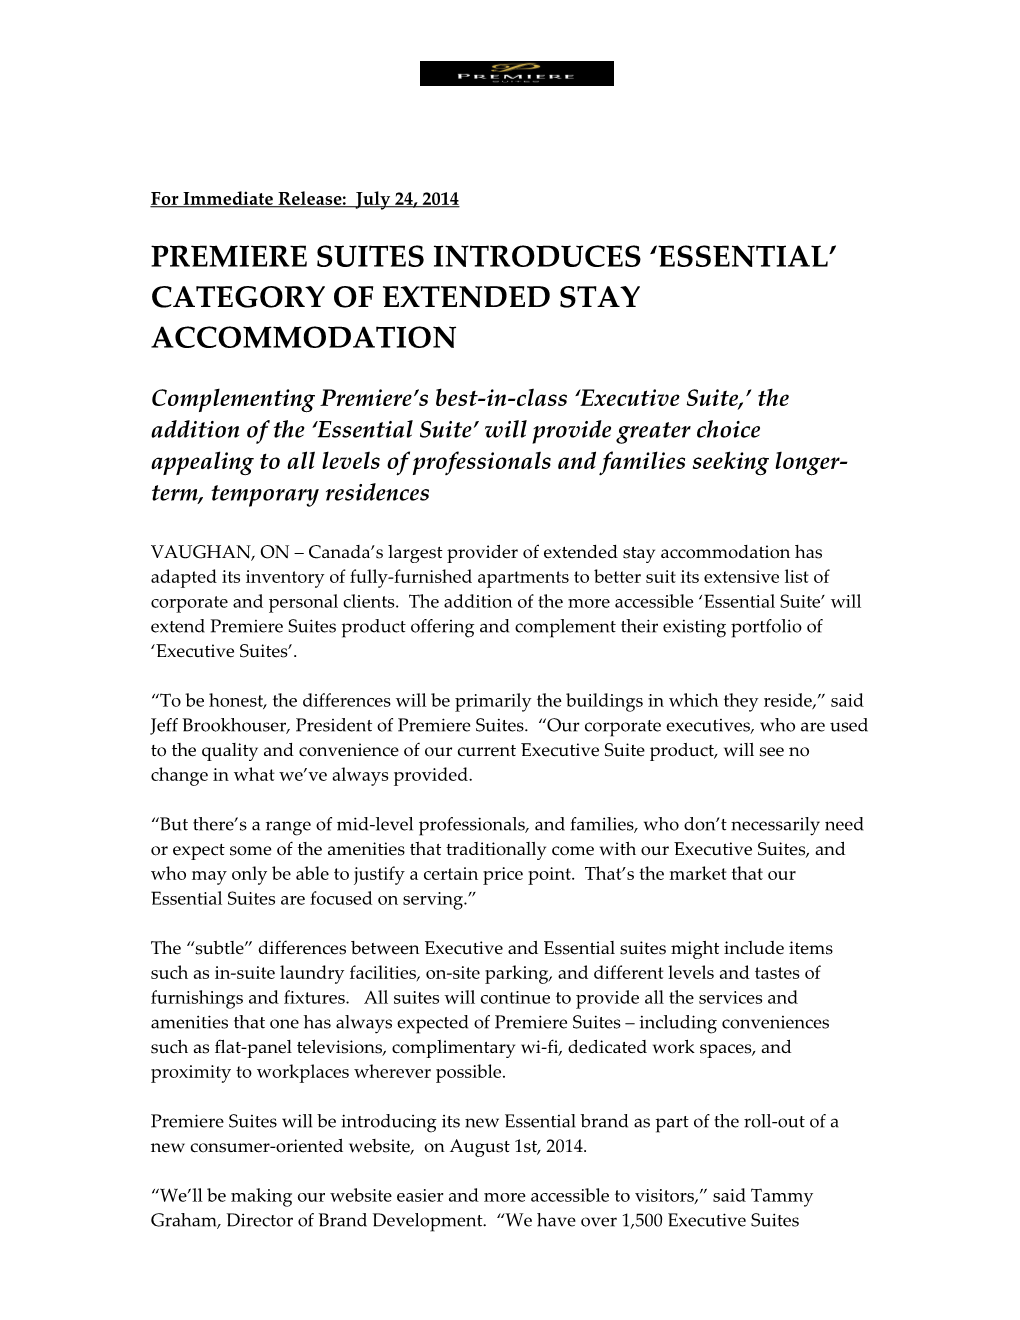 Premiere Suites Introduces Essential Category of Extended Stay Accommodation